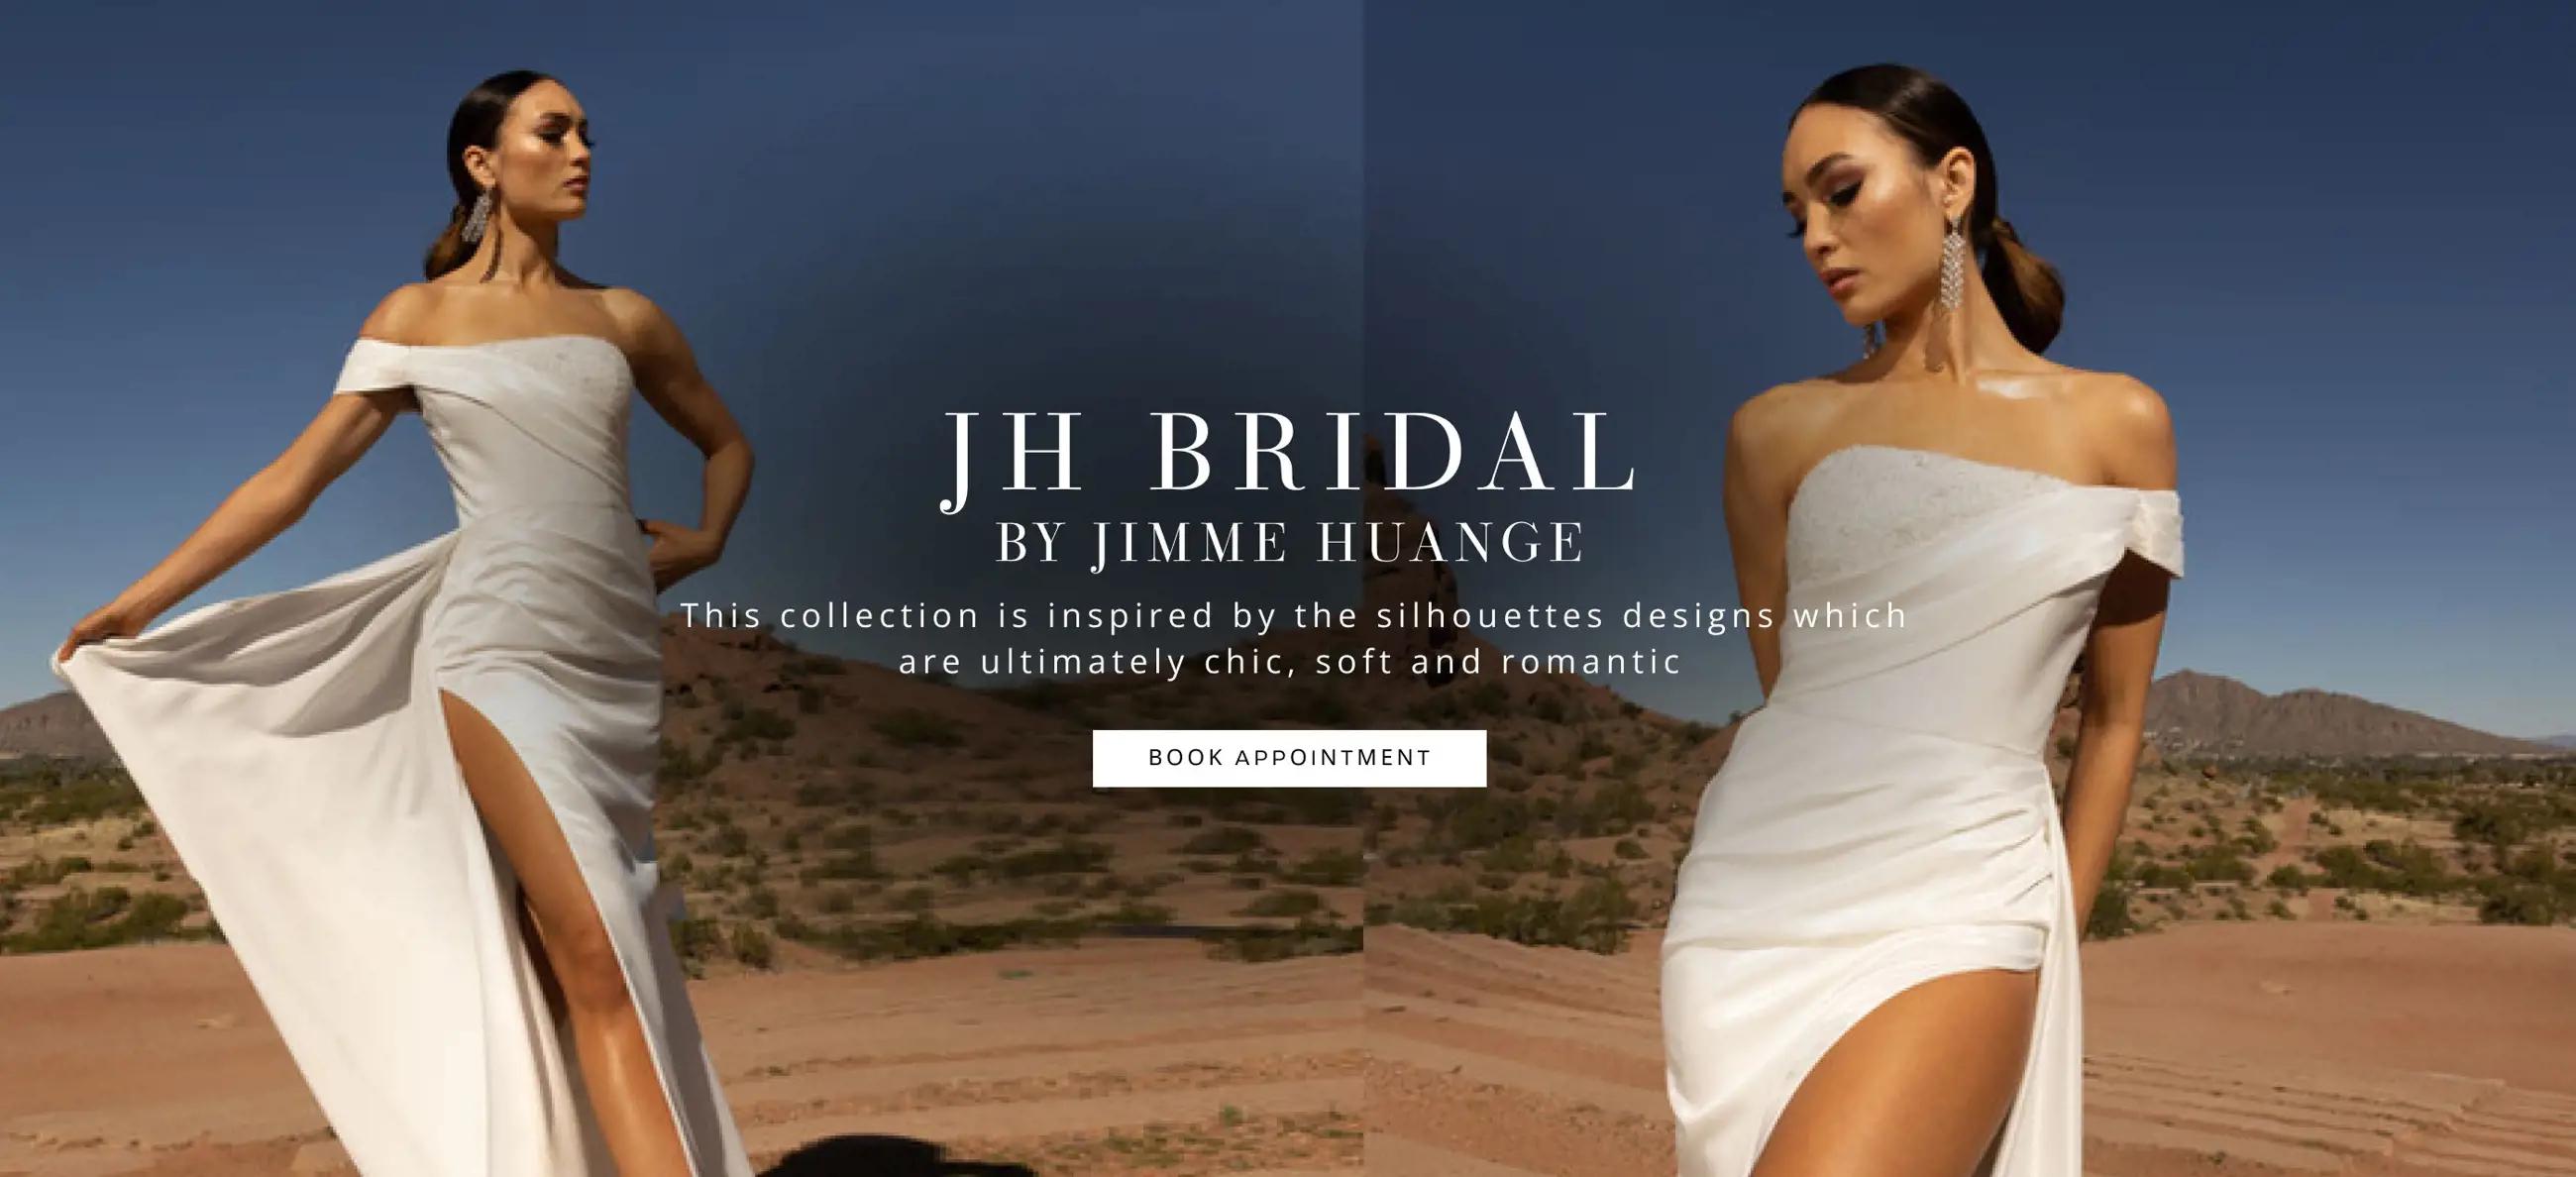 JH Bridal by Jimme Huang